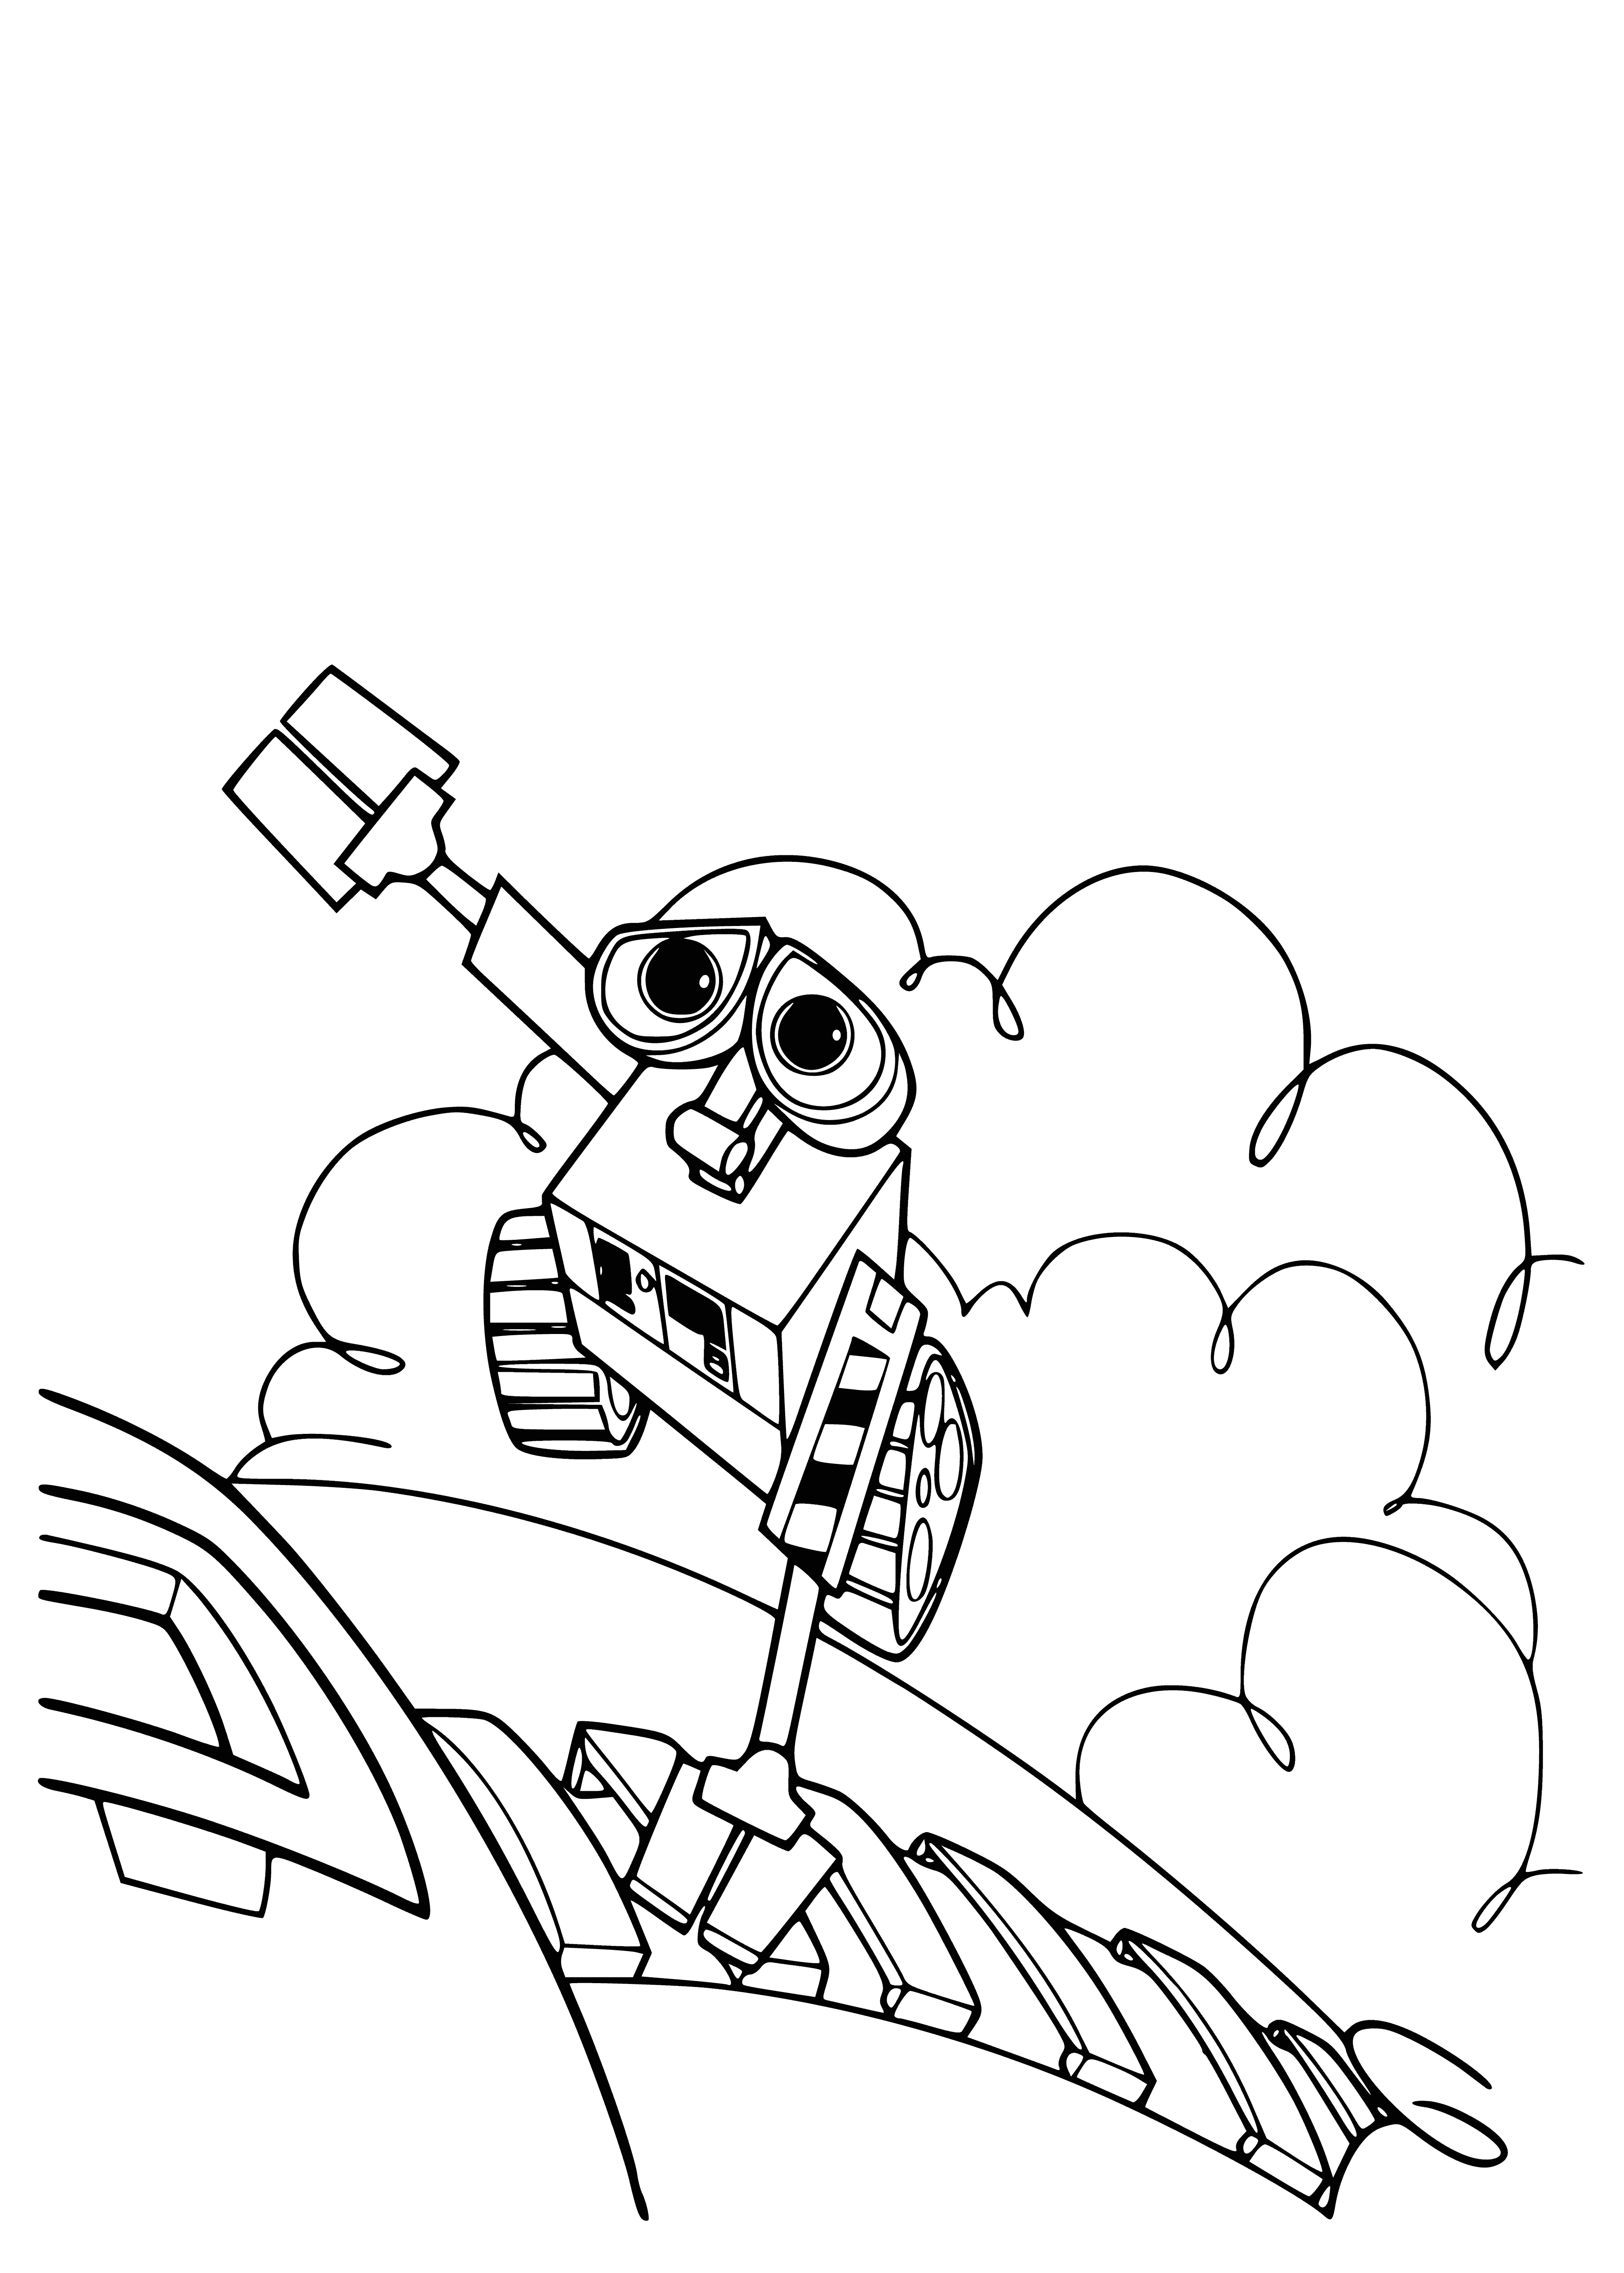 Valley holds on coloring page